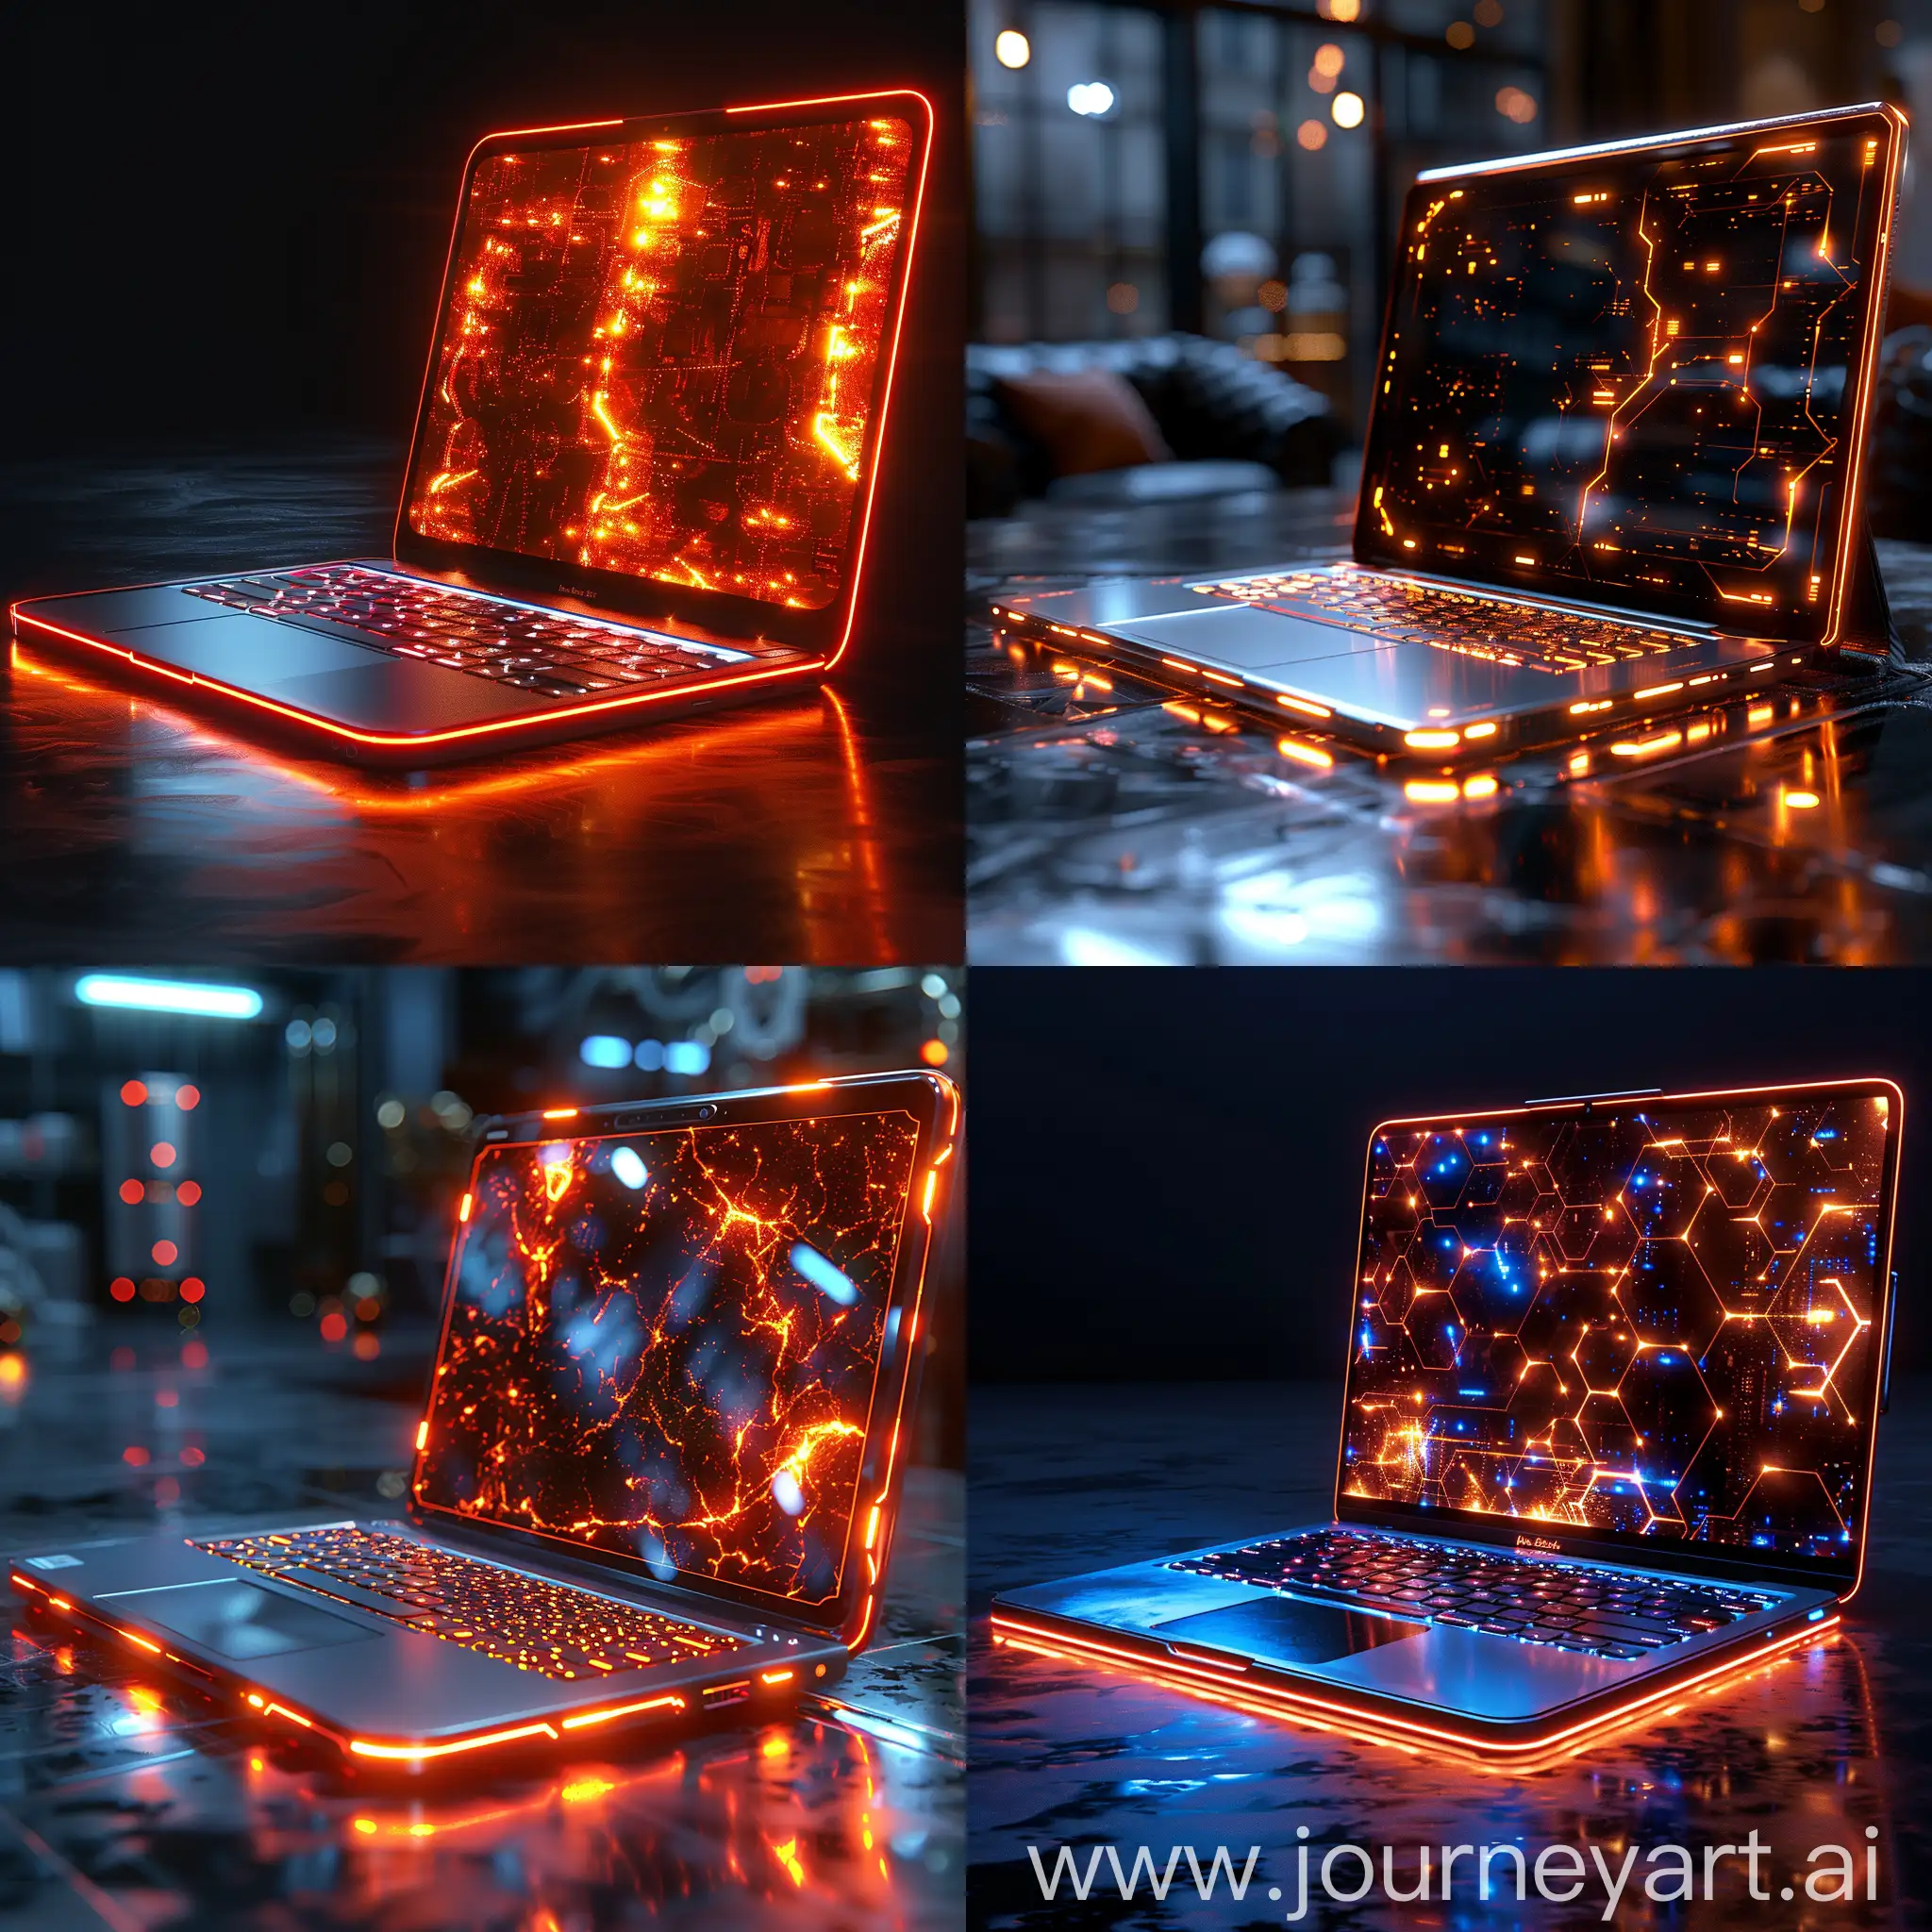 Futuristic-UltraModern-Laptop-with-Glowing-Materials-and-Metals